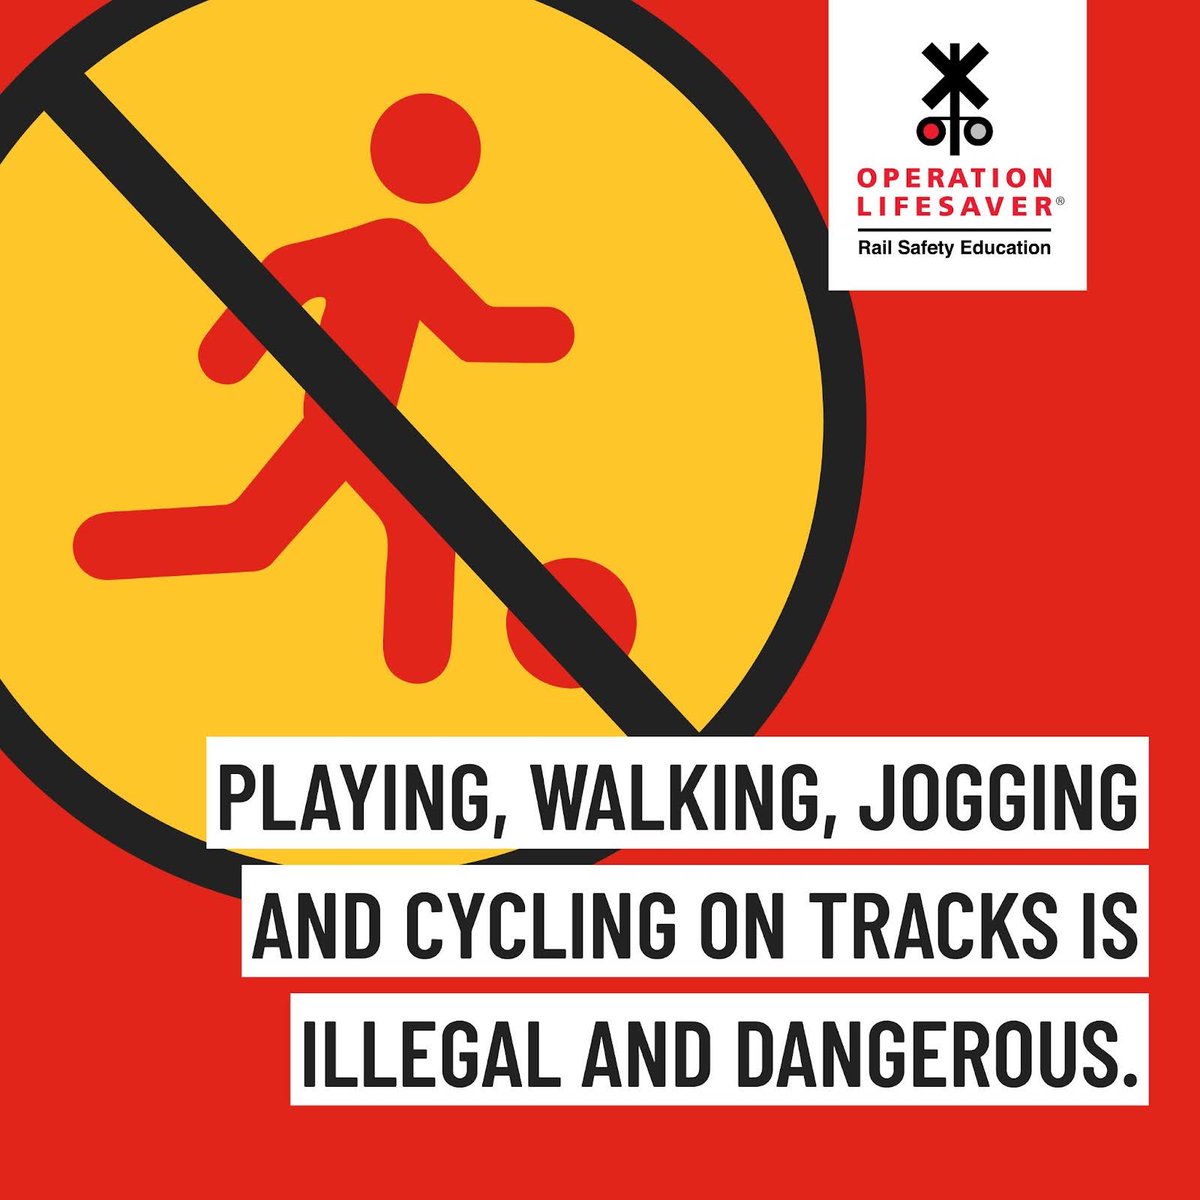 #StayOffStayAwayStaySafe this summer! Remember, the only thing that belongs on railroad tracks is a train. #STOPTrackTragedies #RailSafetyEducation